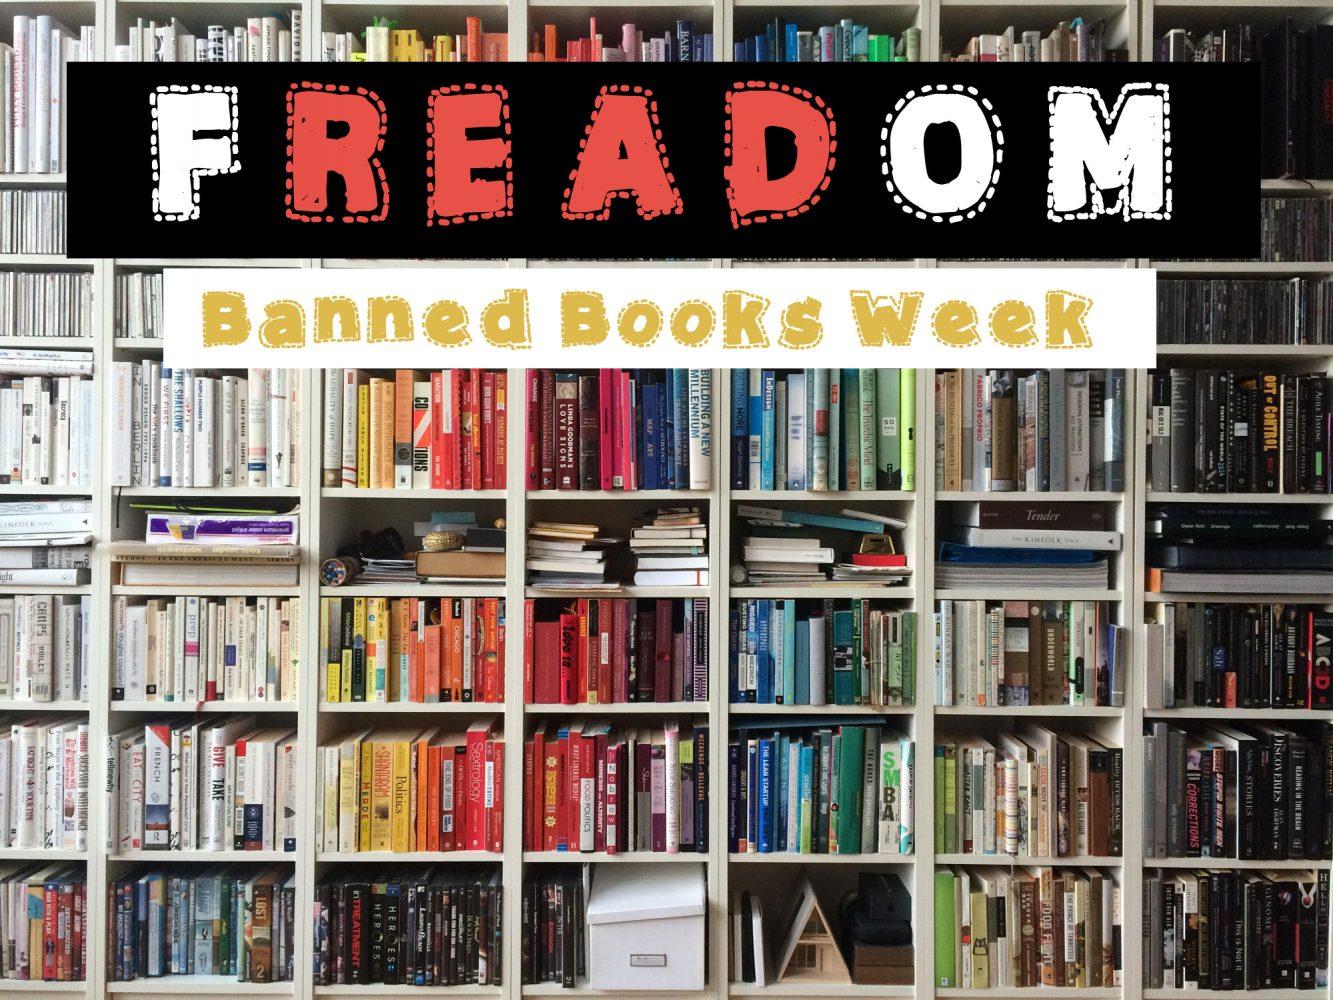 Get caught: Banned Books Week in the IRC